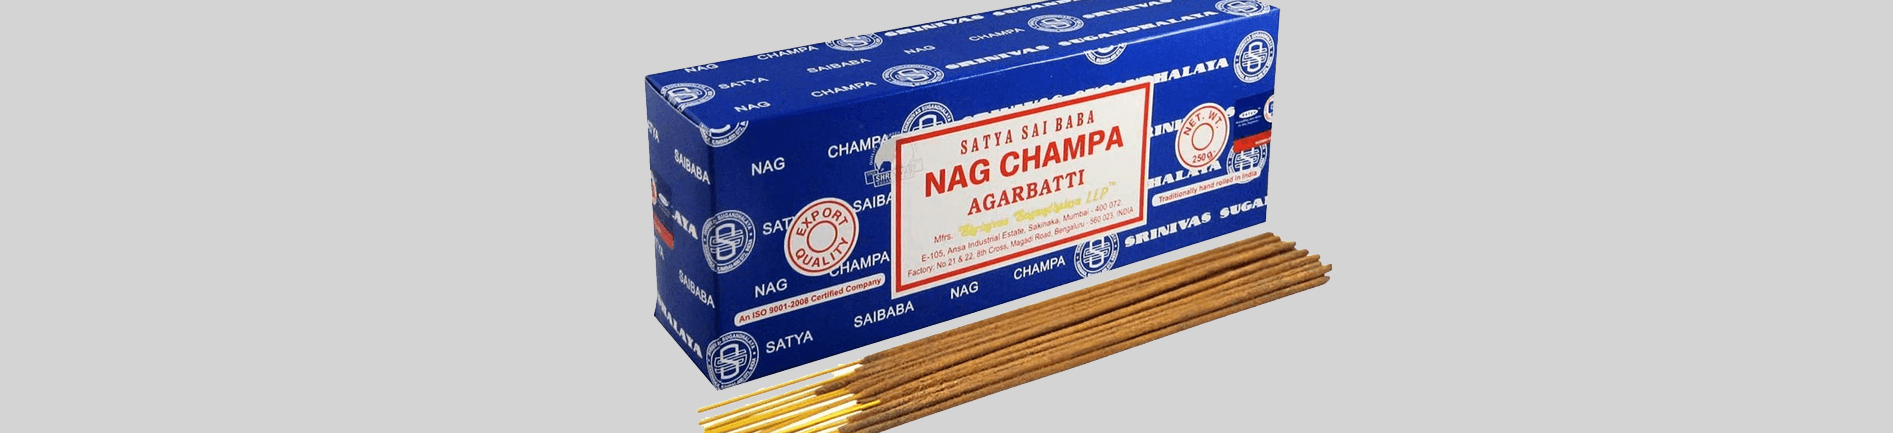 Shop by Collection - Nag Champa - hotRAGS.com